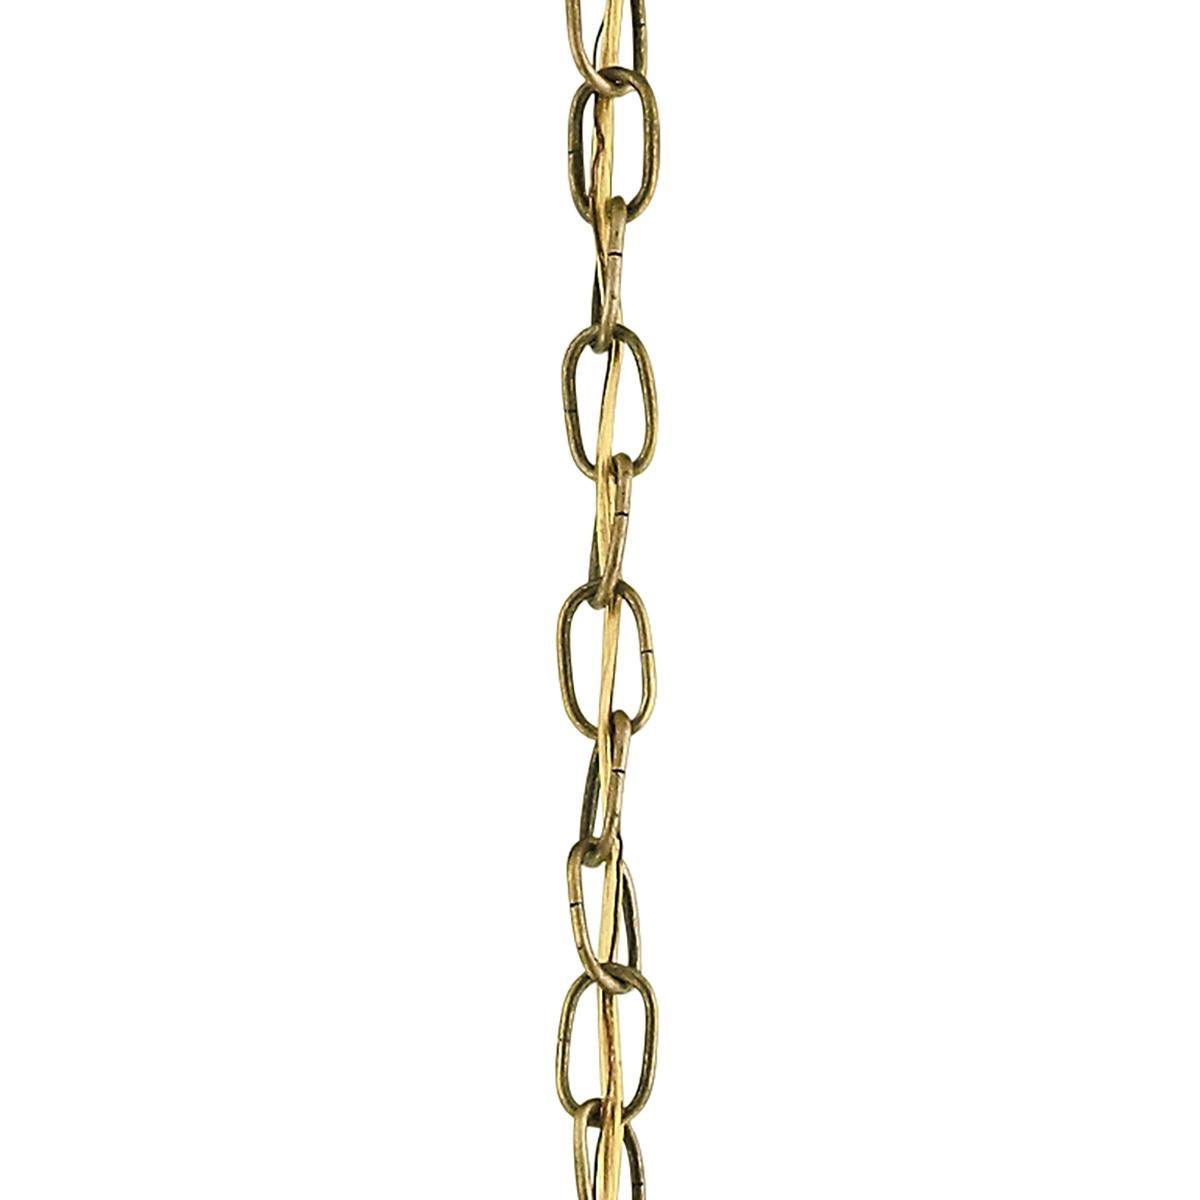 36" Standard Gauge Chain Natural Brass on a white background